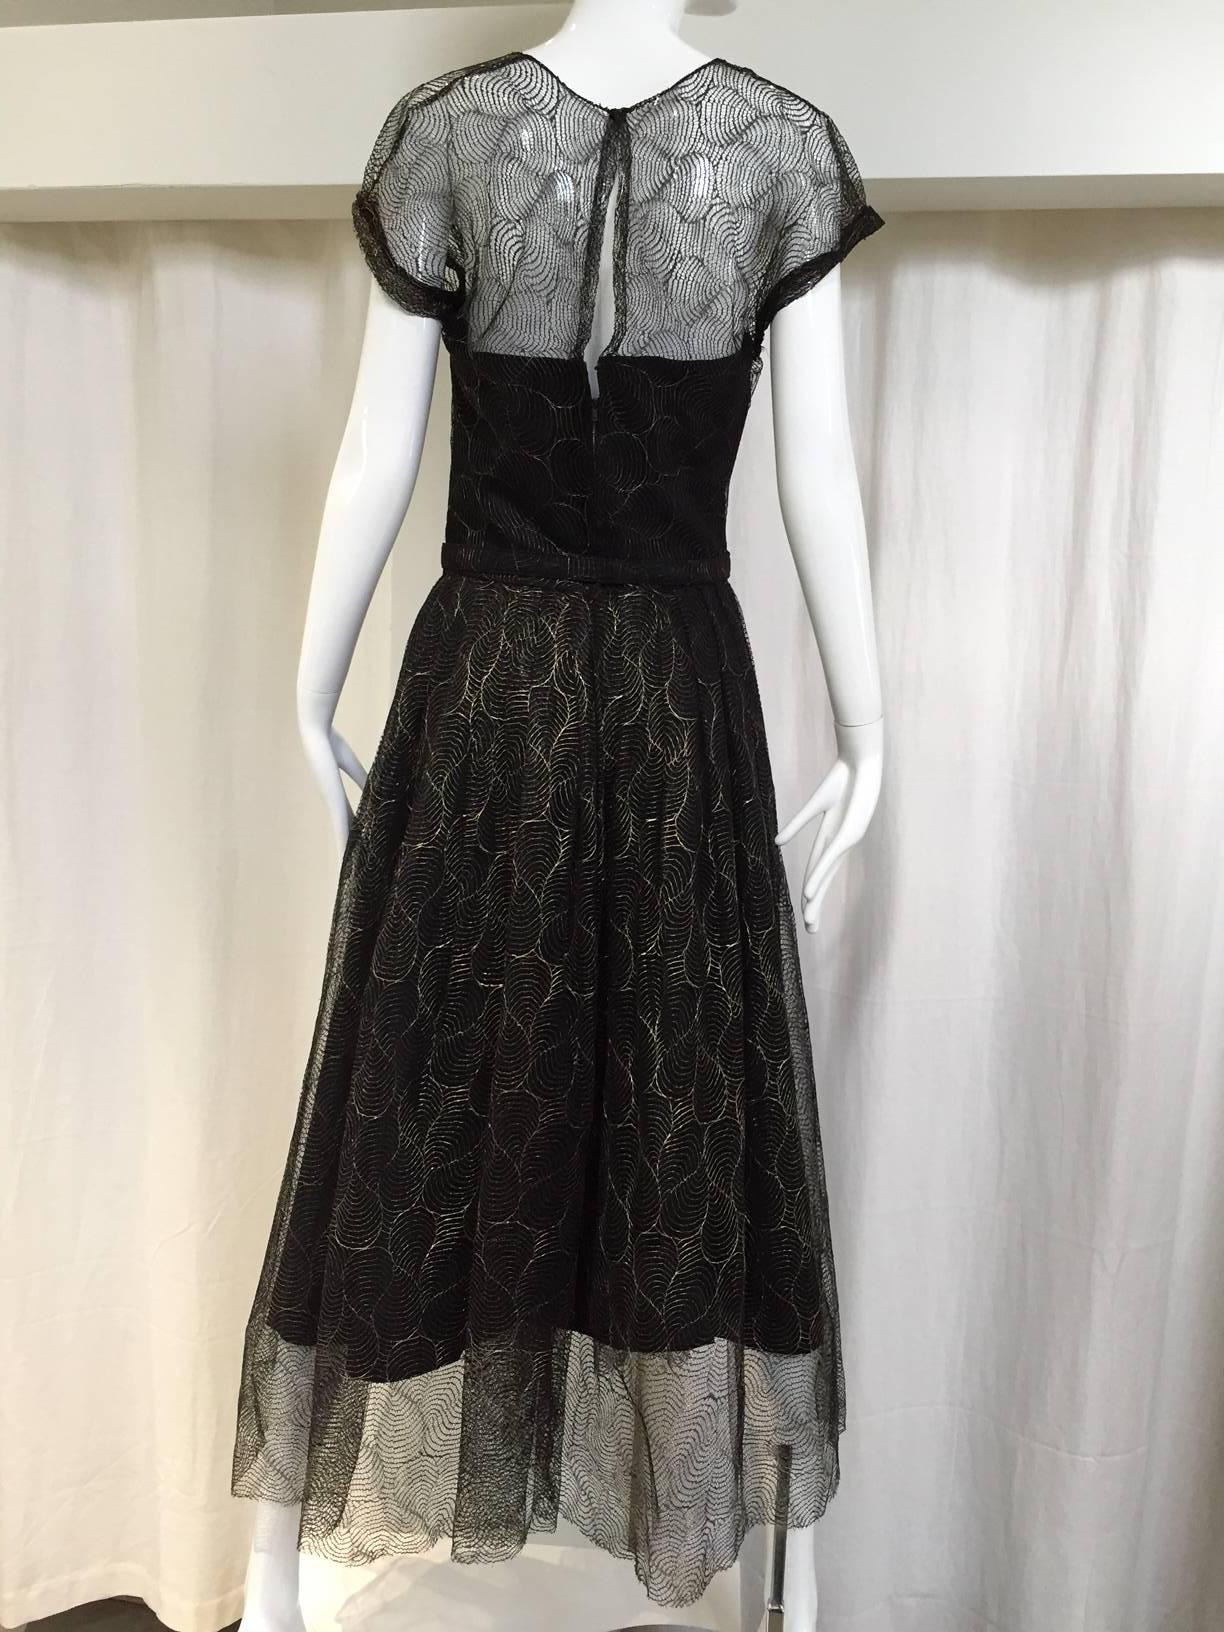 Women's 1950s Black and gold lace cocktail dress